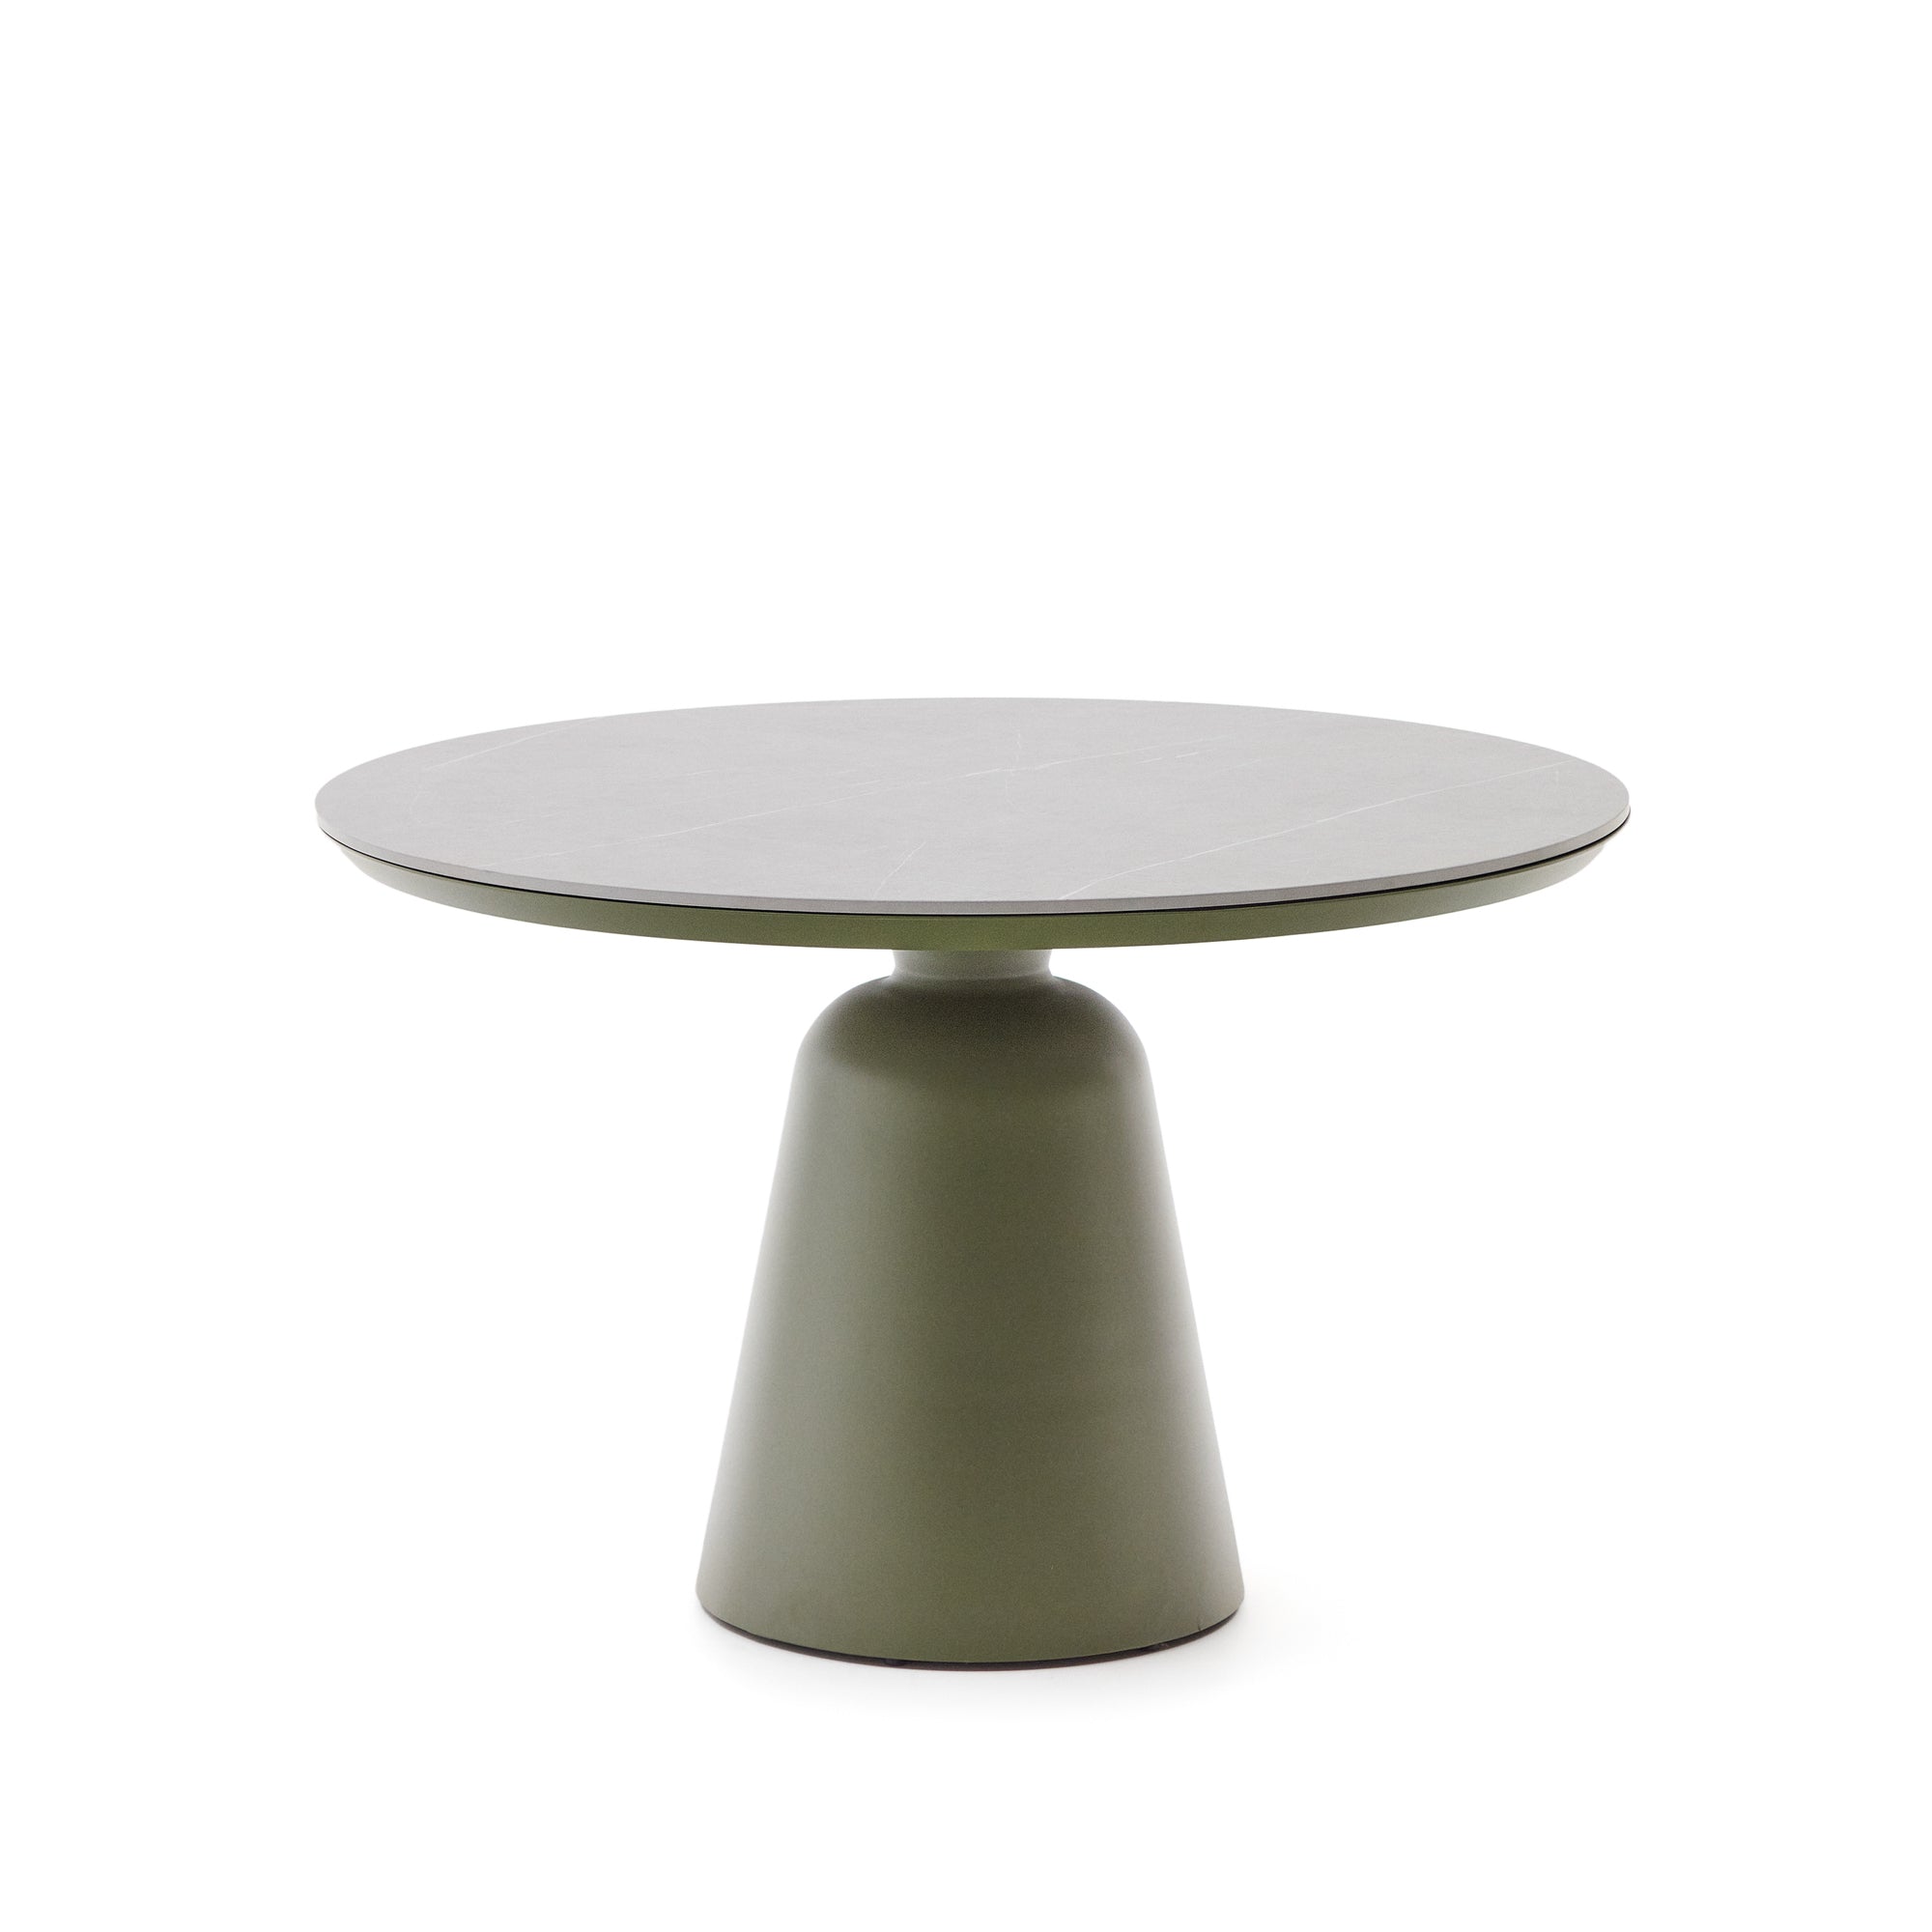 Tudons outdoor table made of aluminum with green ceramic table top, Ø120 cm